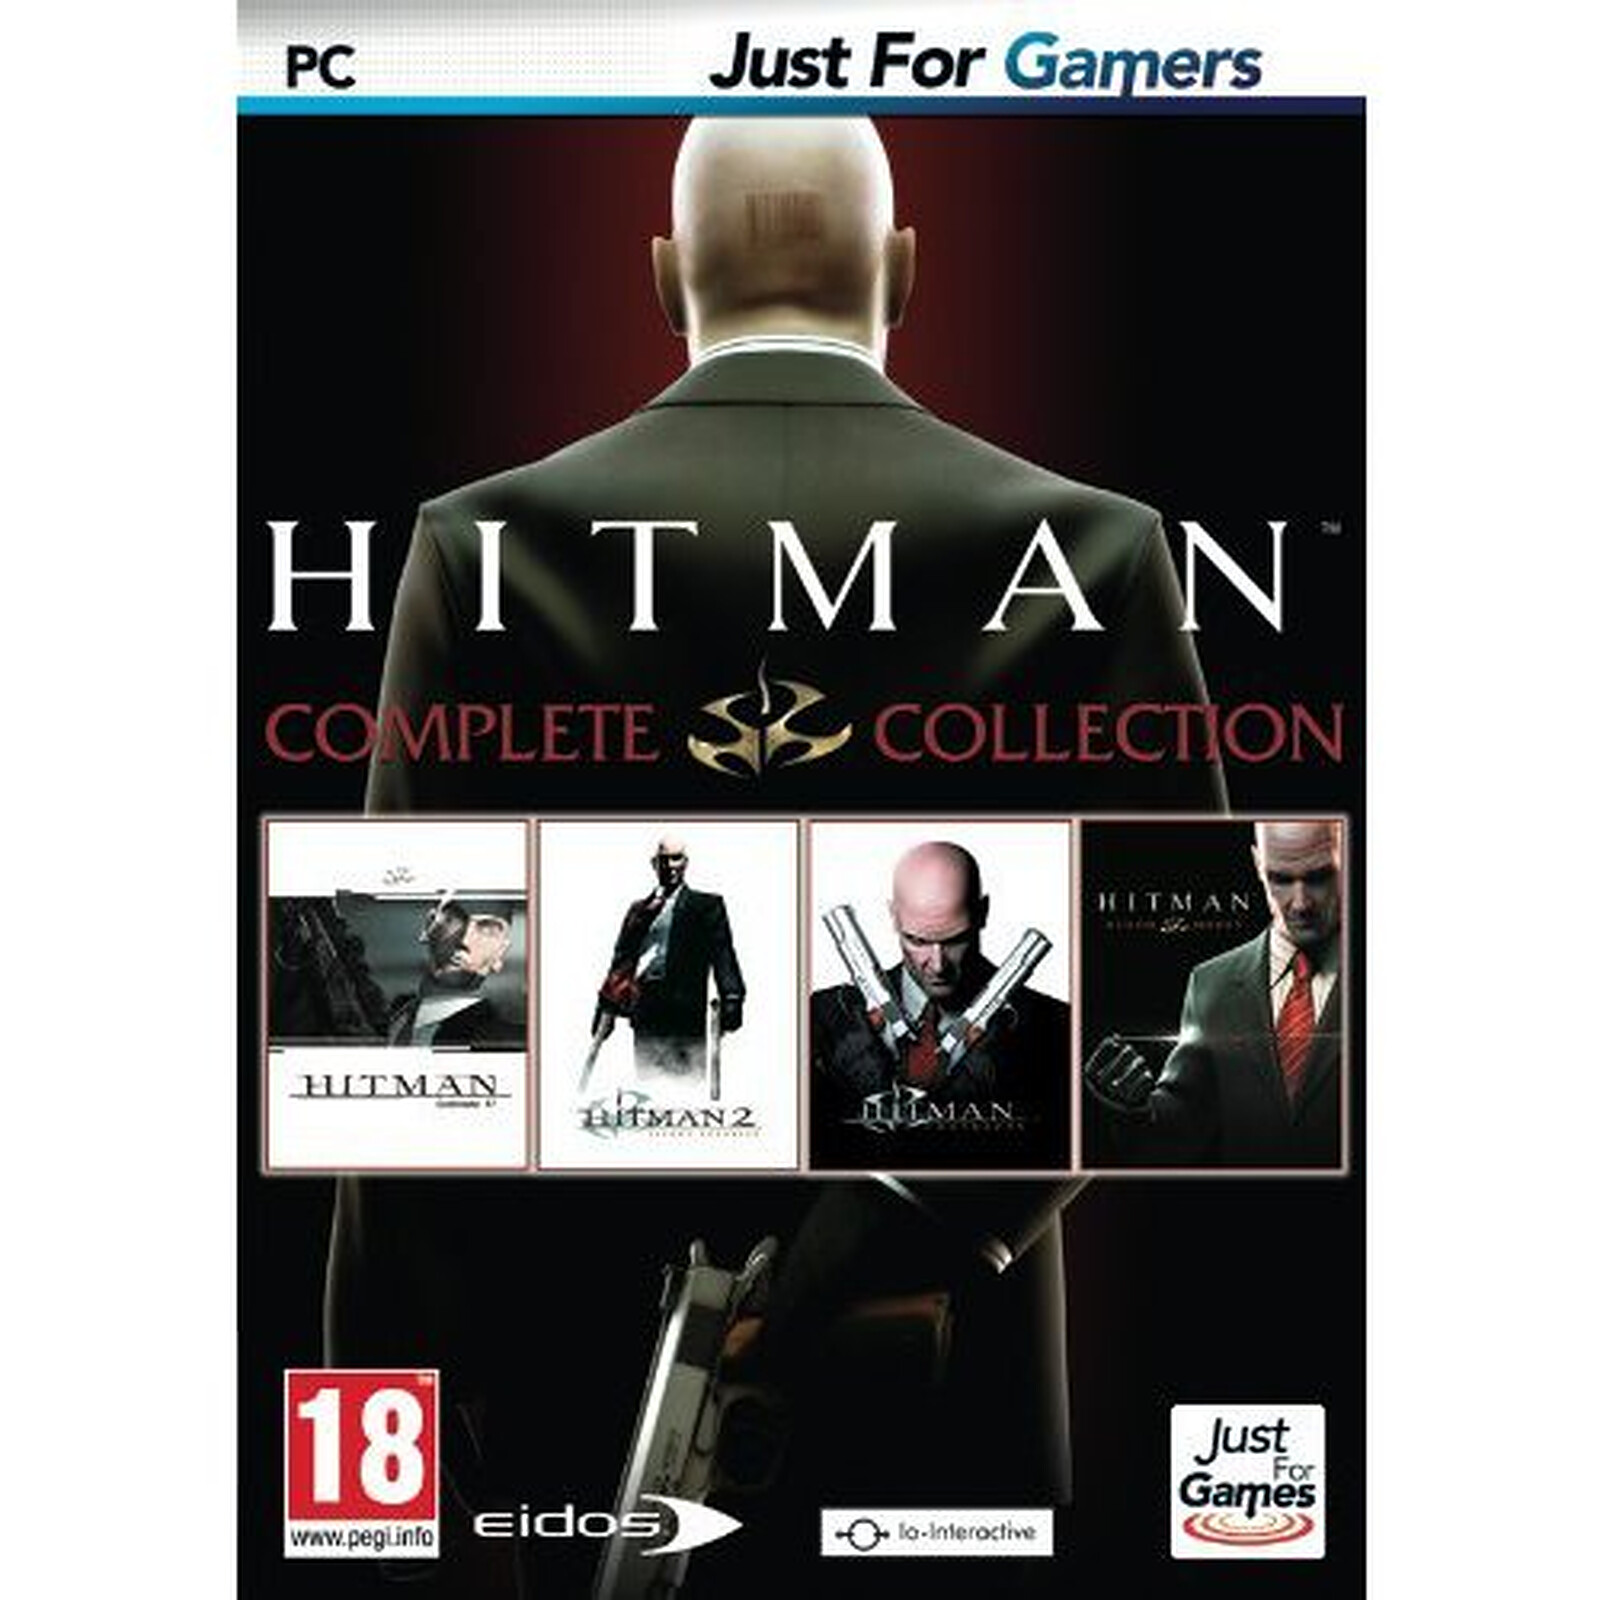  Hitman  Complete Collection PC  Jeux  PC  Just For Games 